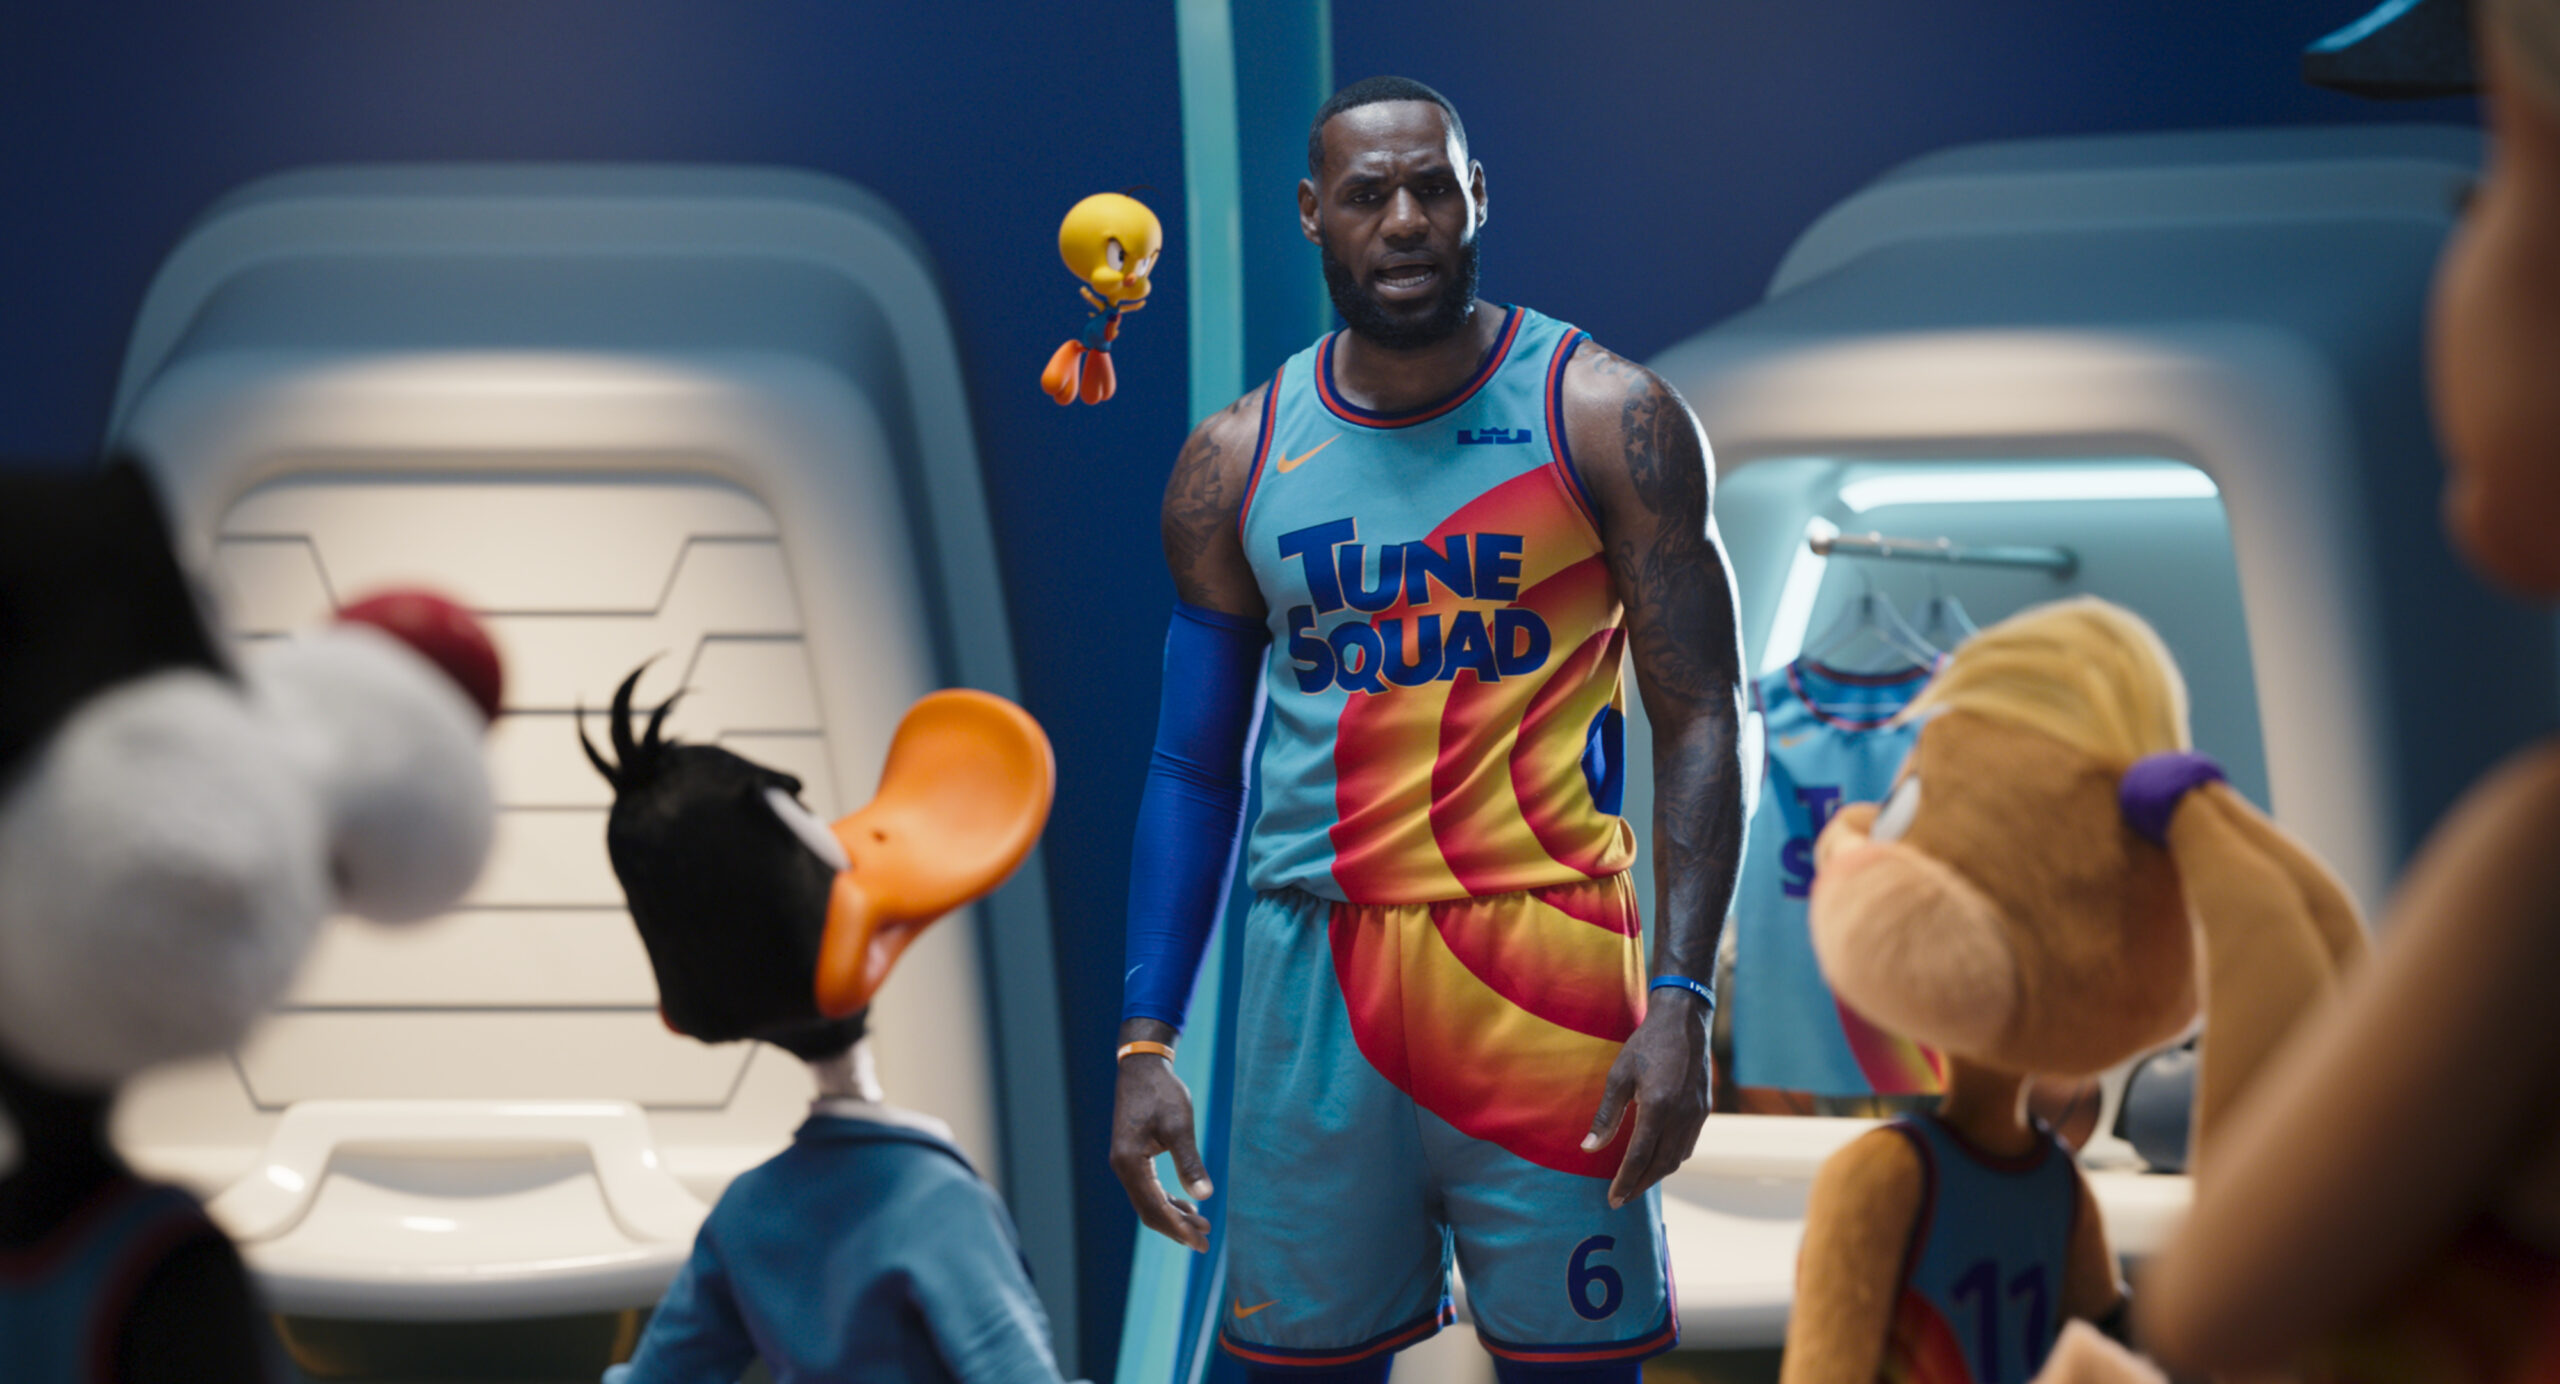 Space Jam: A New Legacy Parents Guide